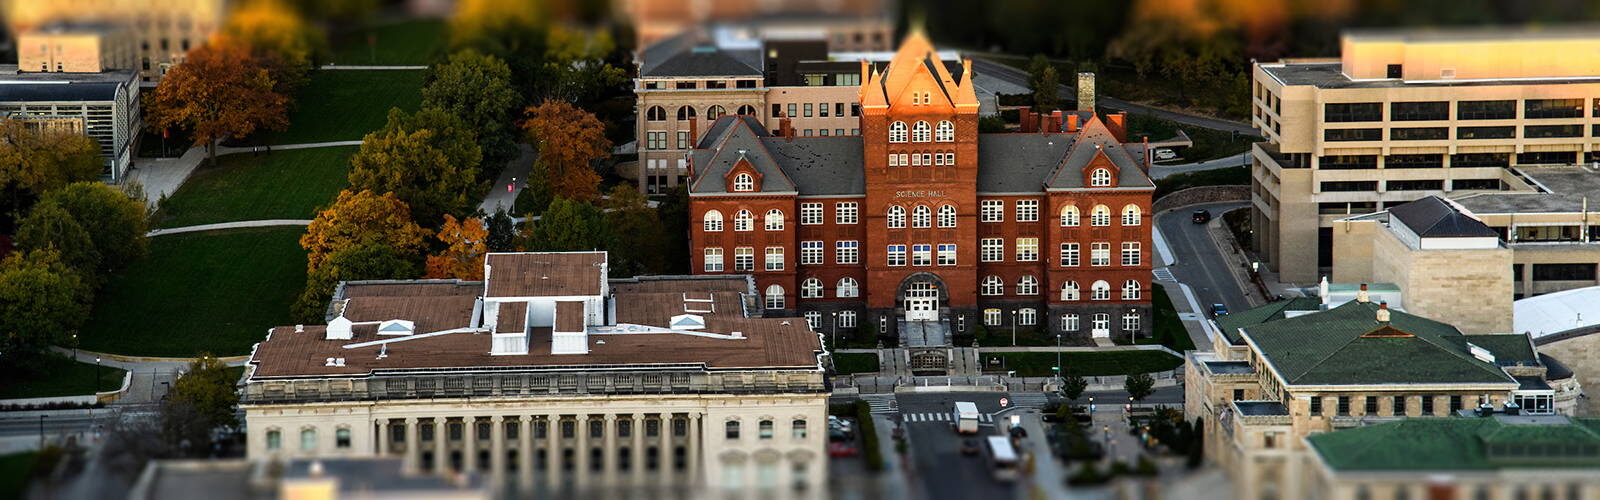 Aerial view of Science Hall at sunset with fall foliage in the background